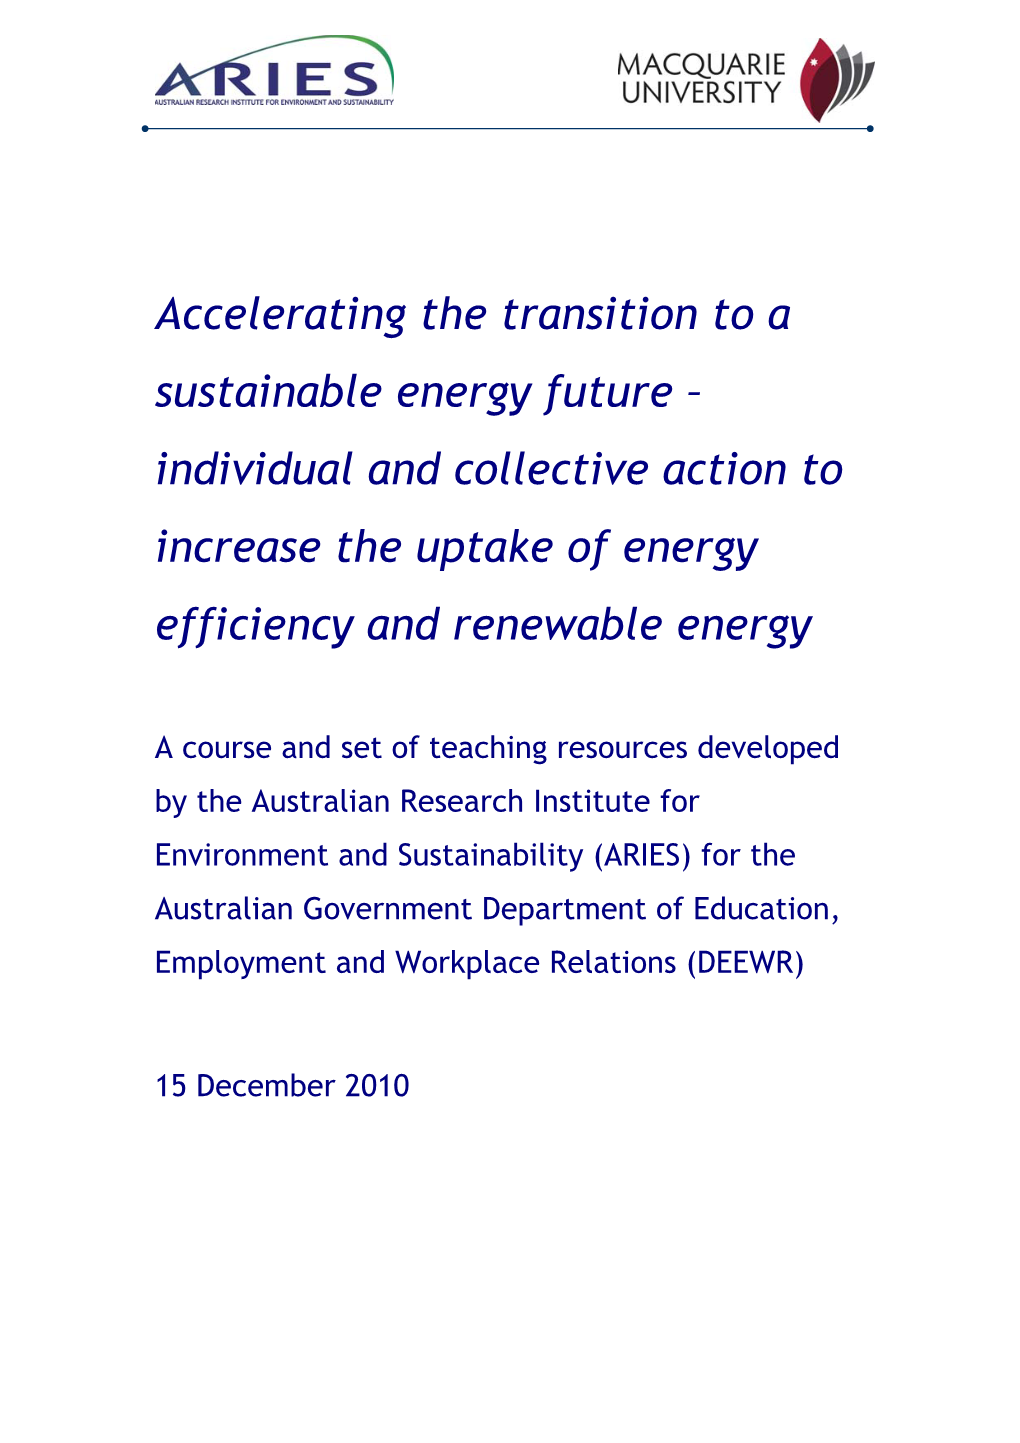 Accelerating the Transition to a Sustainable Energy Future – Individual and Collective Action to Increase the Uptake of Energy Efficiency and Renewable Energy